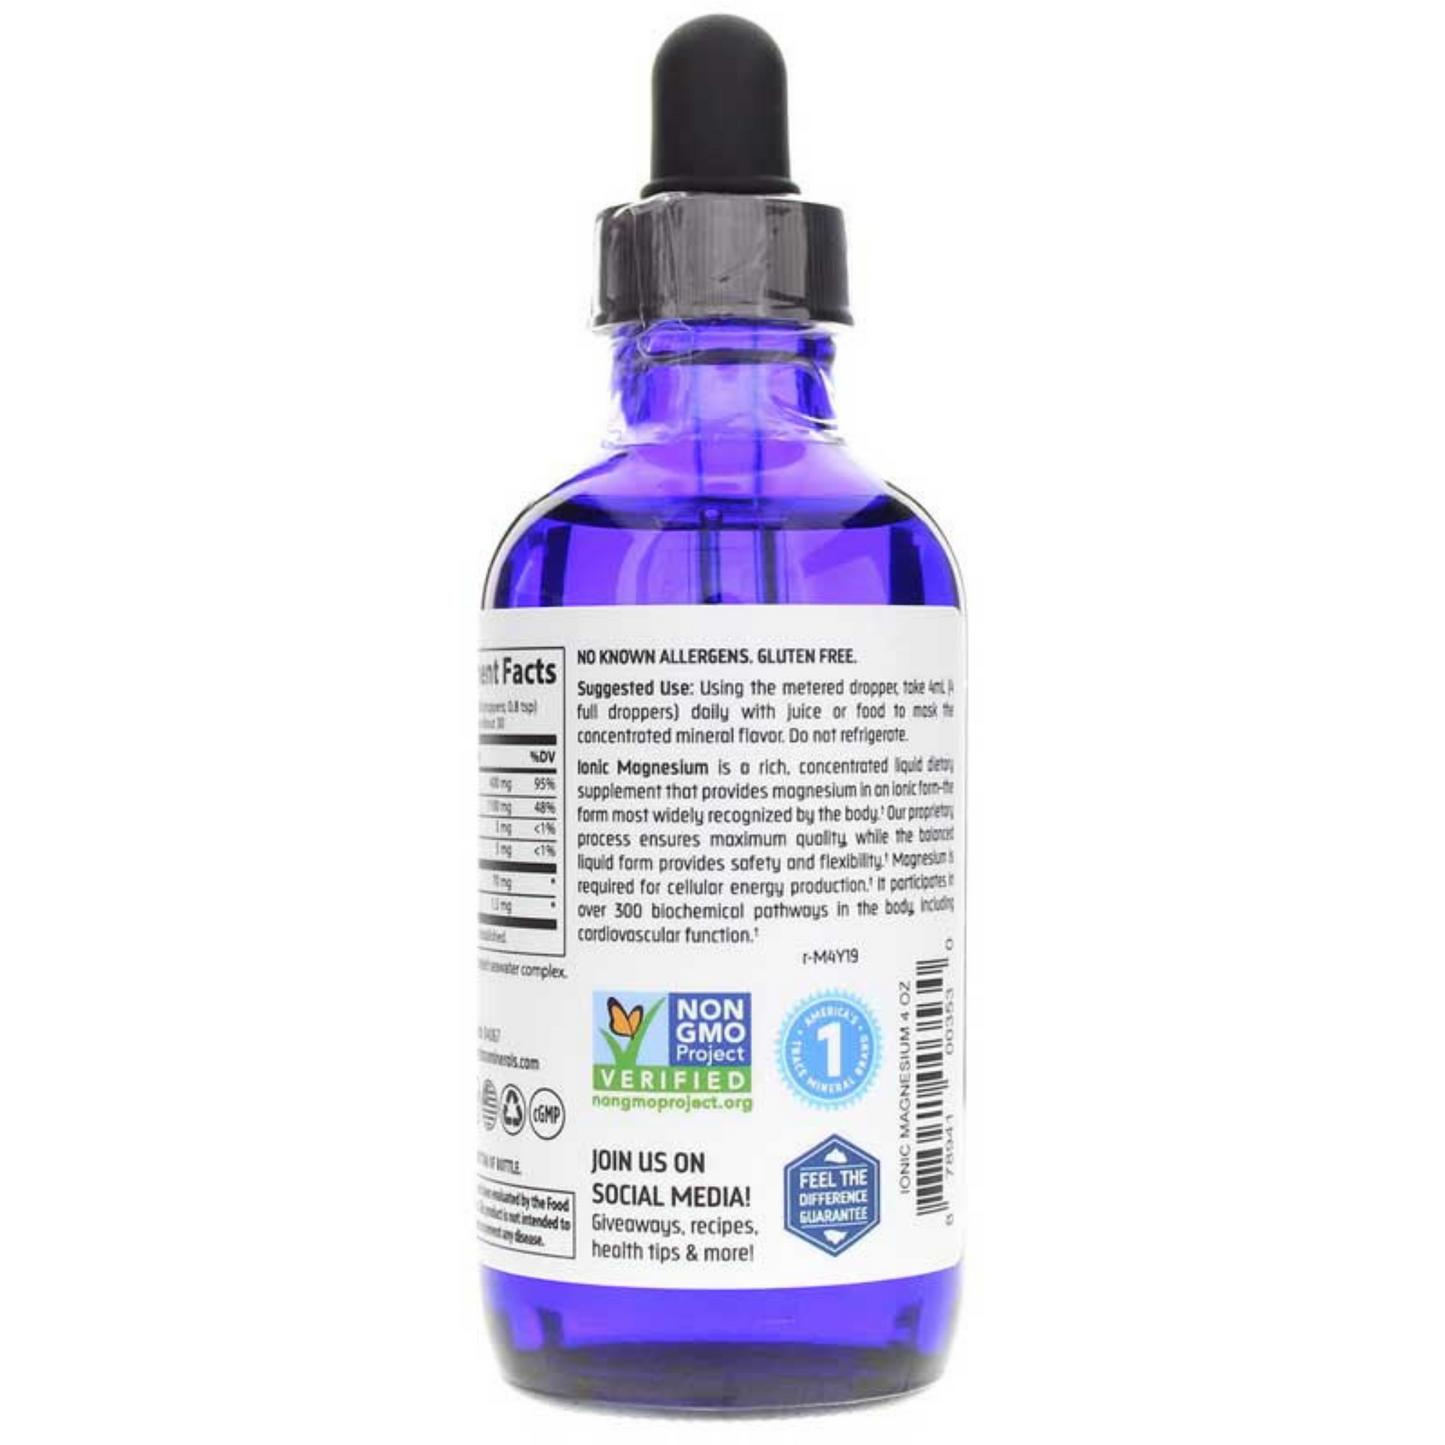 Trace Minerals Research Ionic Magnesium (4 oz) #10084688